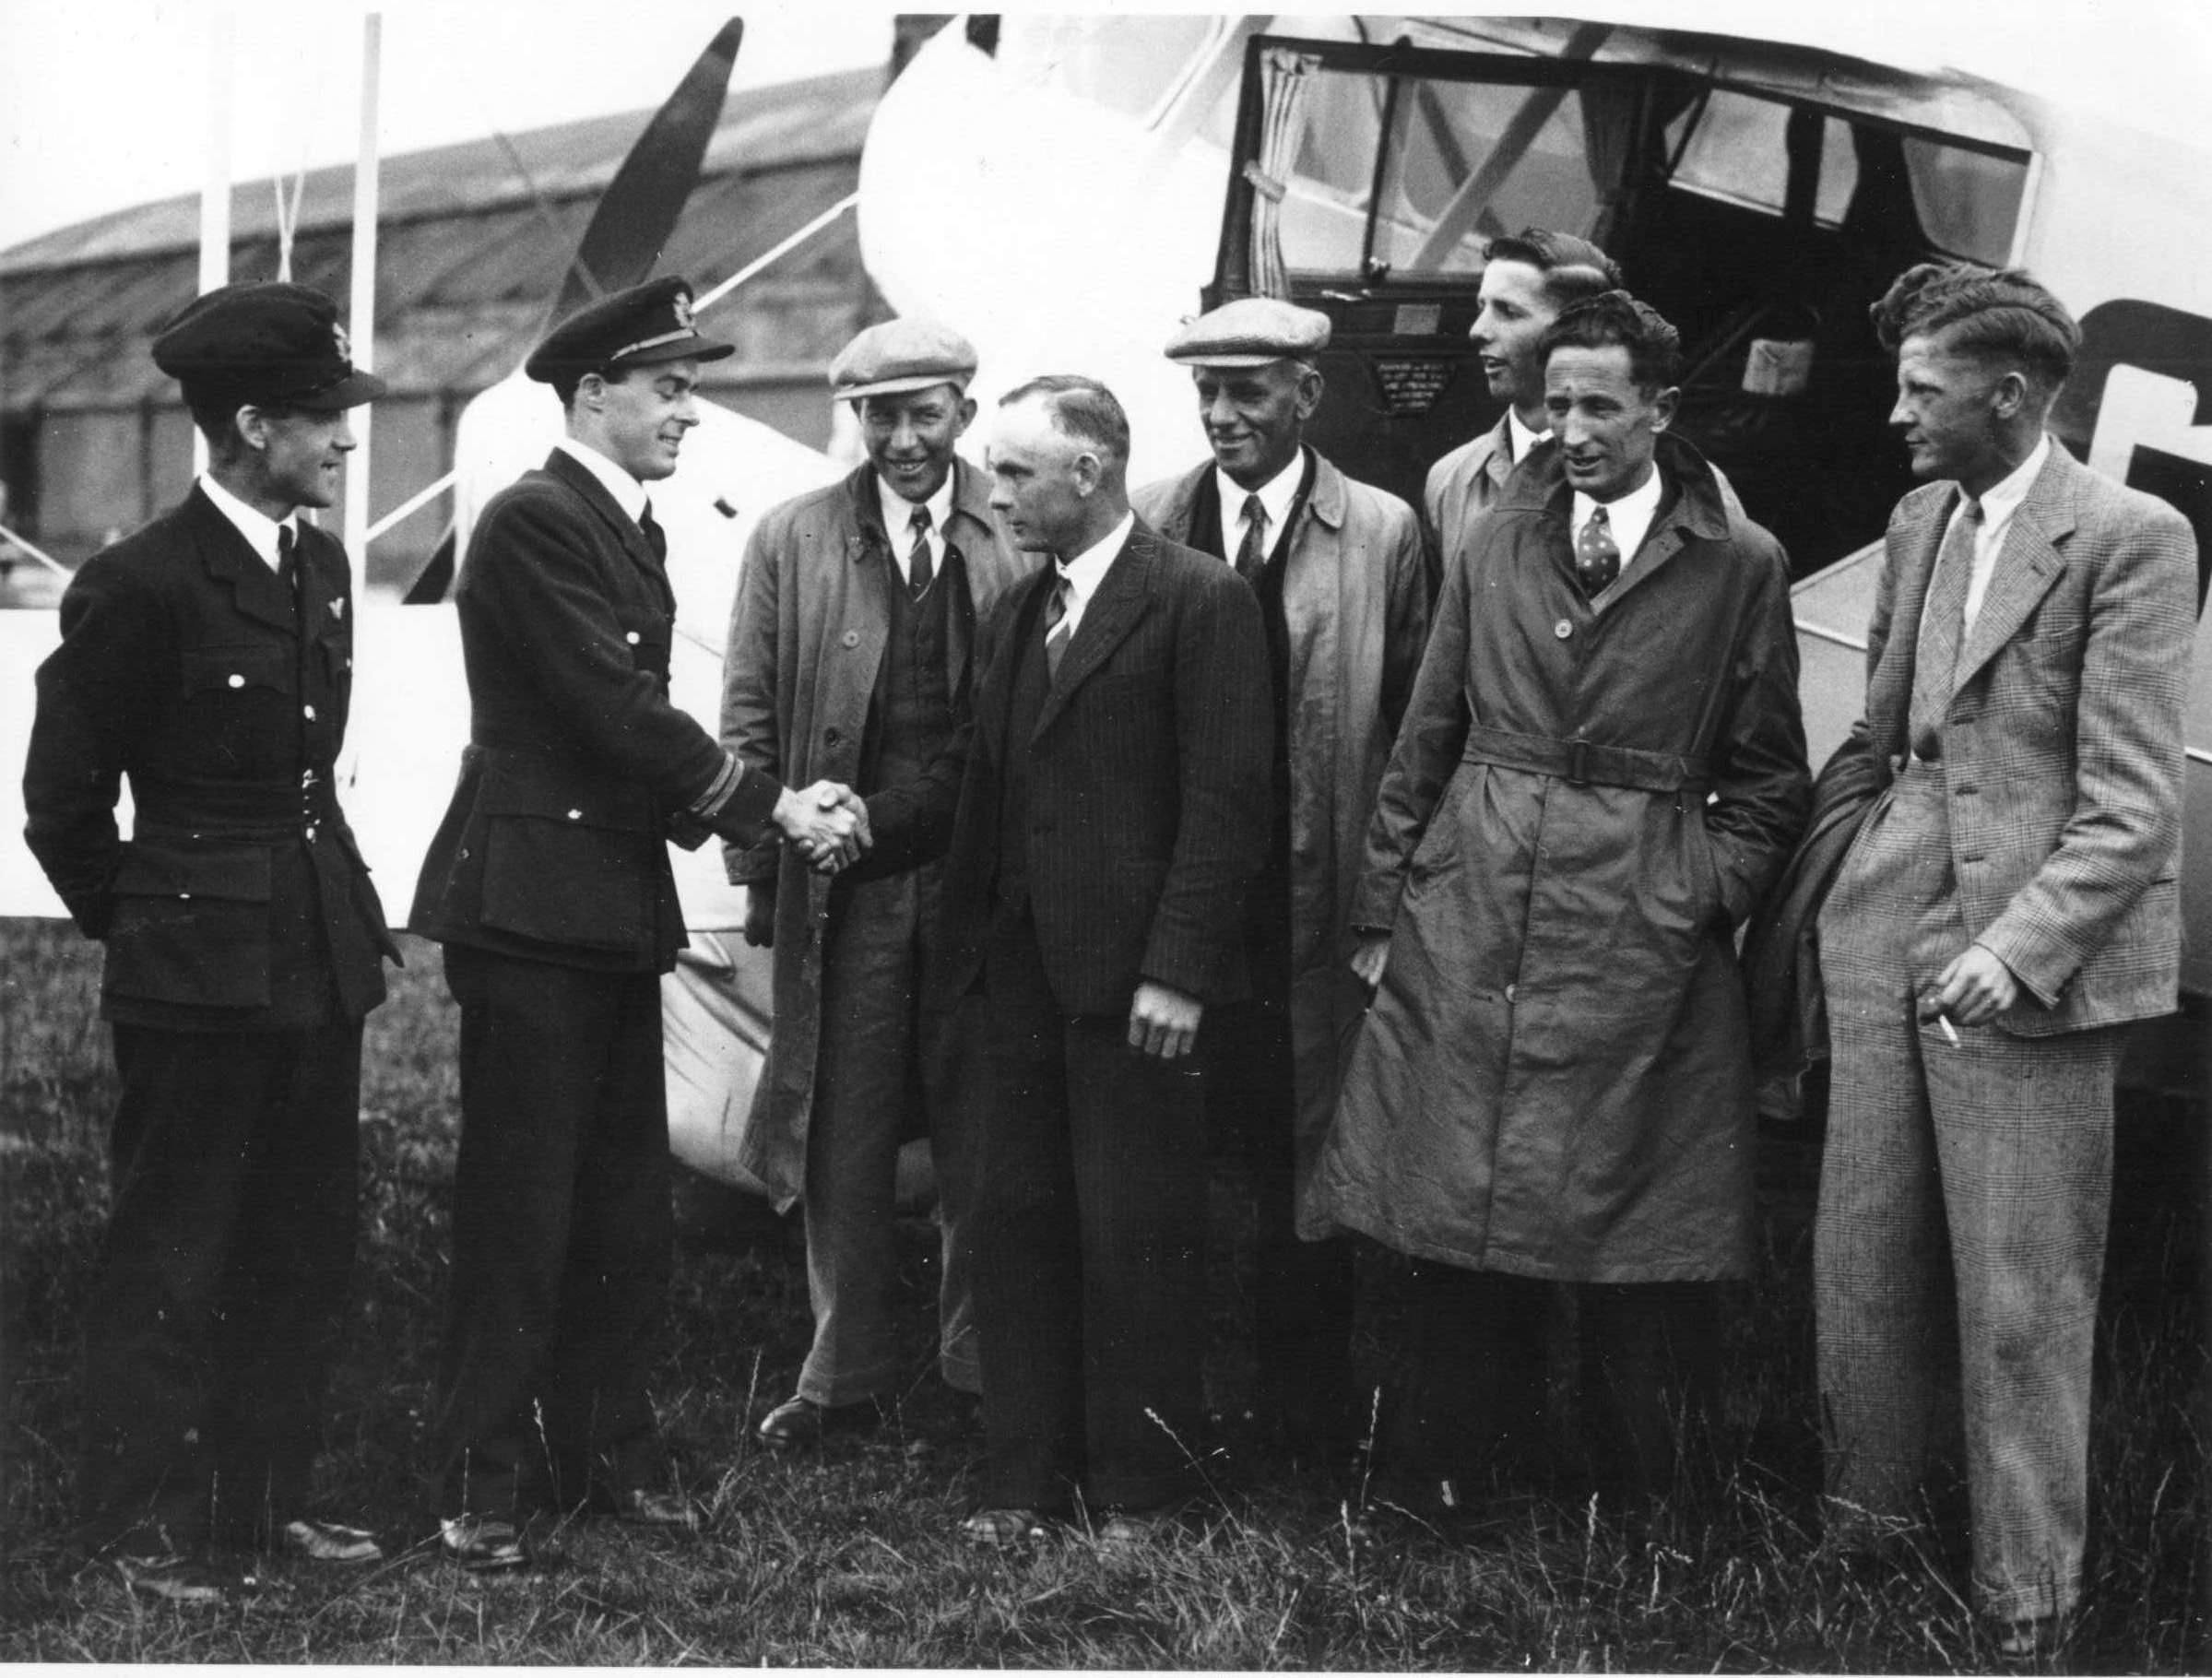 Two fligth crew with a group of local men in front of an aeroplane